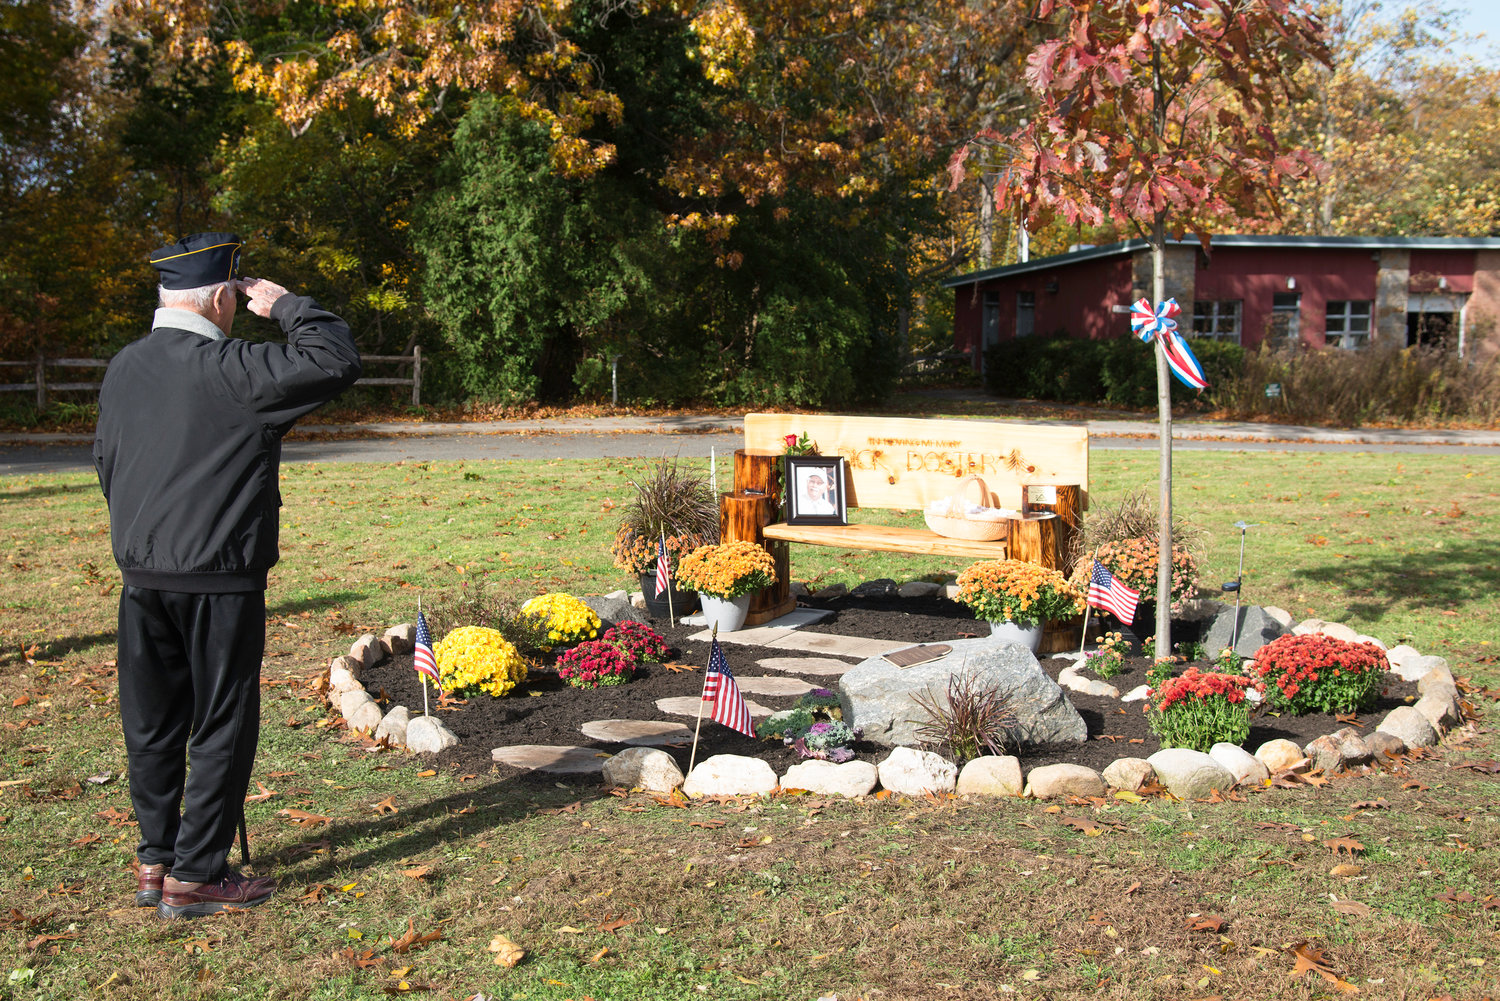 A veteran saluted the memorial to Richard Doster, which includes a red oak tree, a bench and flowers.